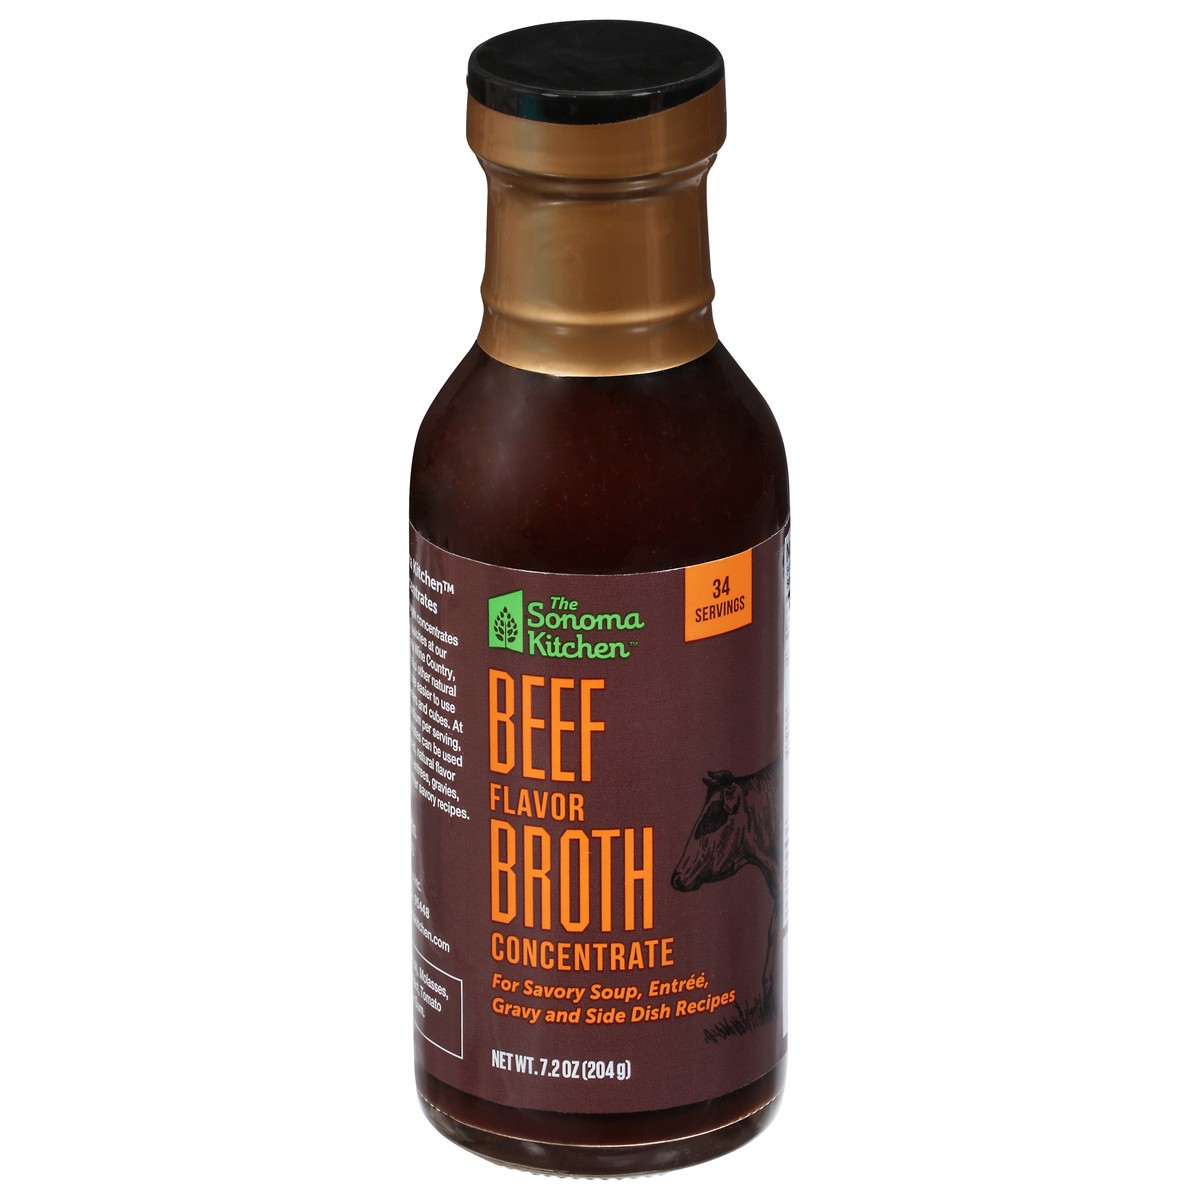 slide 1 of 9, The Sonoma Kitchen Concentrate Beef Flavor Broth 7.2 oz, 7.2 oz